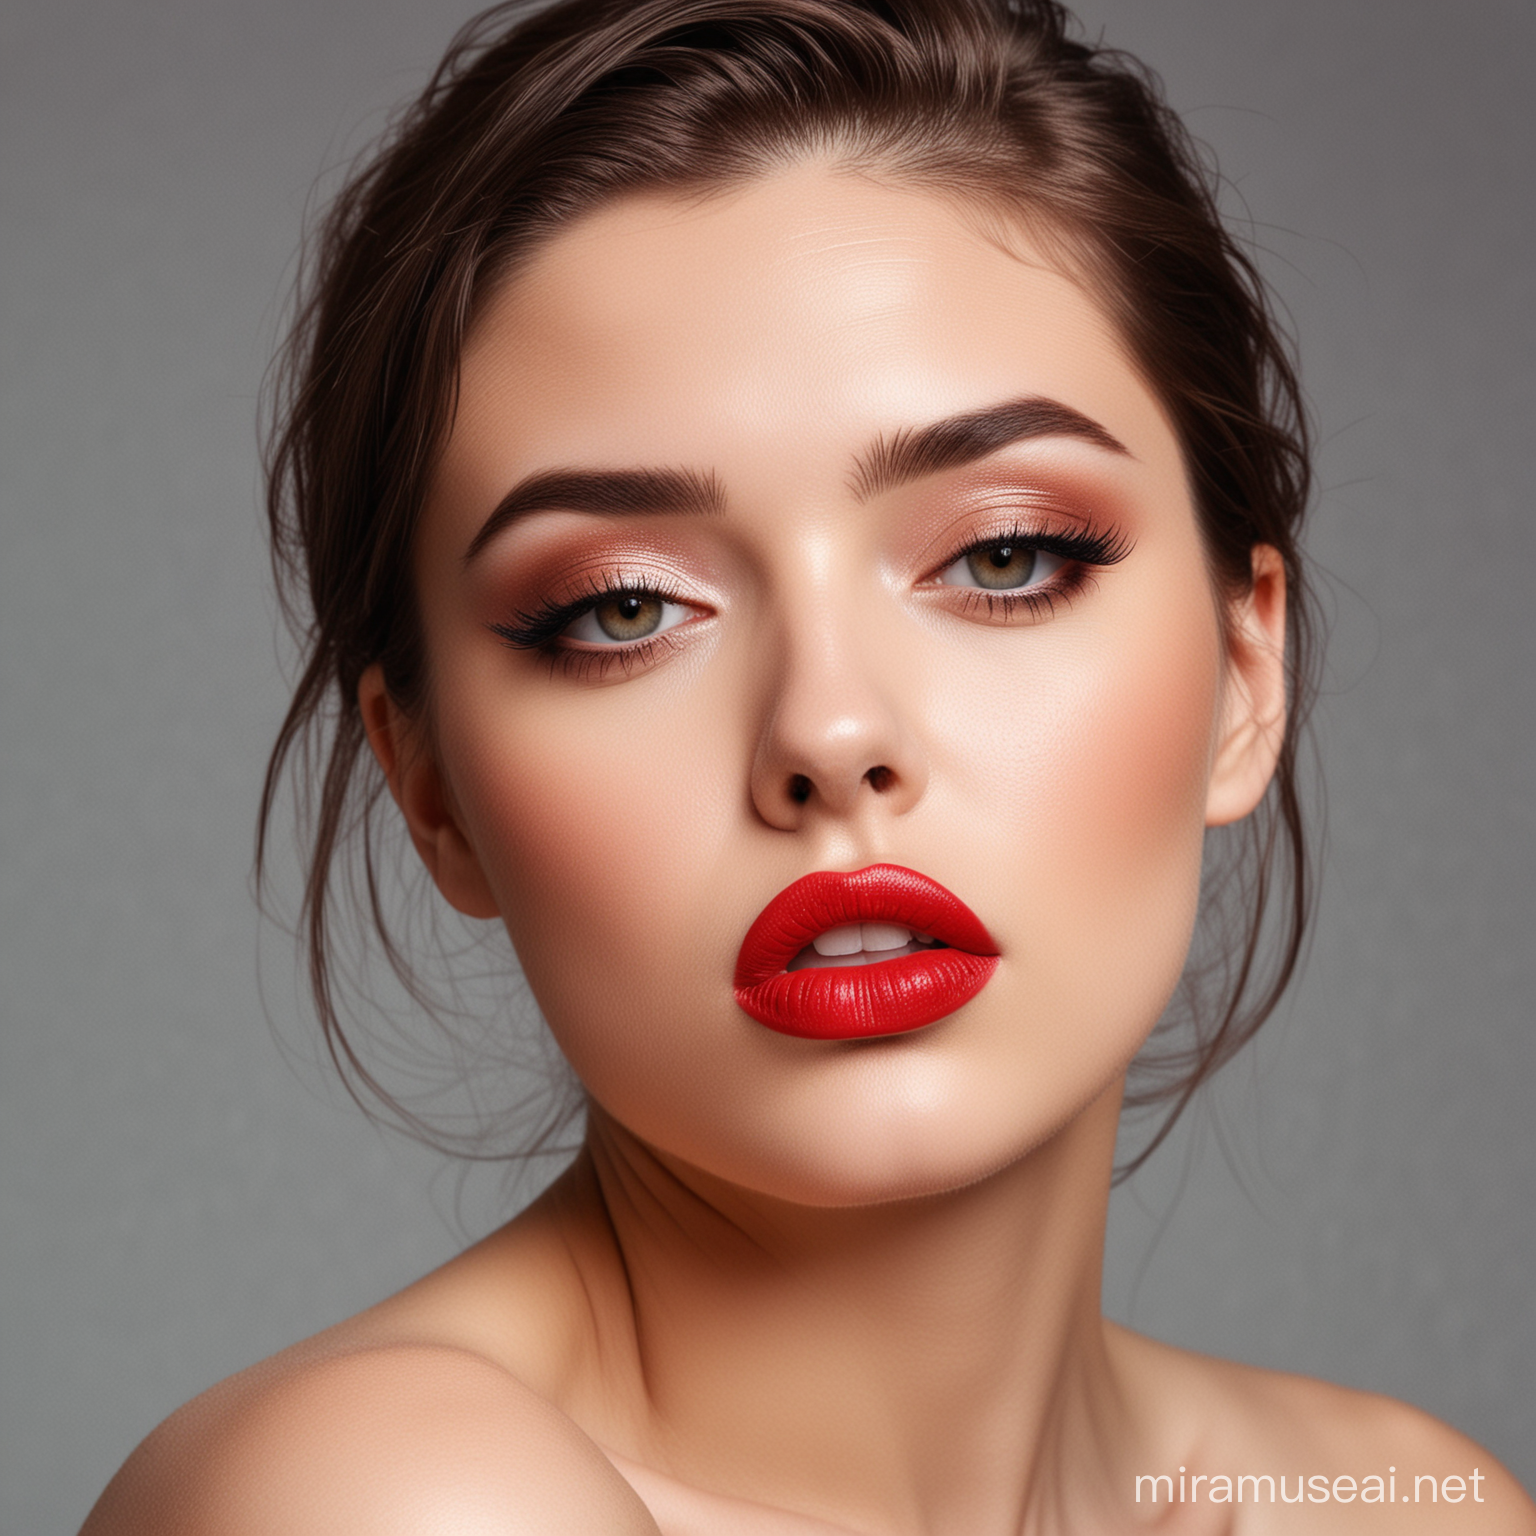 Seductive Fashion Portrait of a Model with Pouty Red Lips